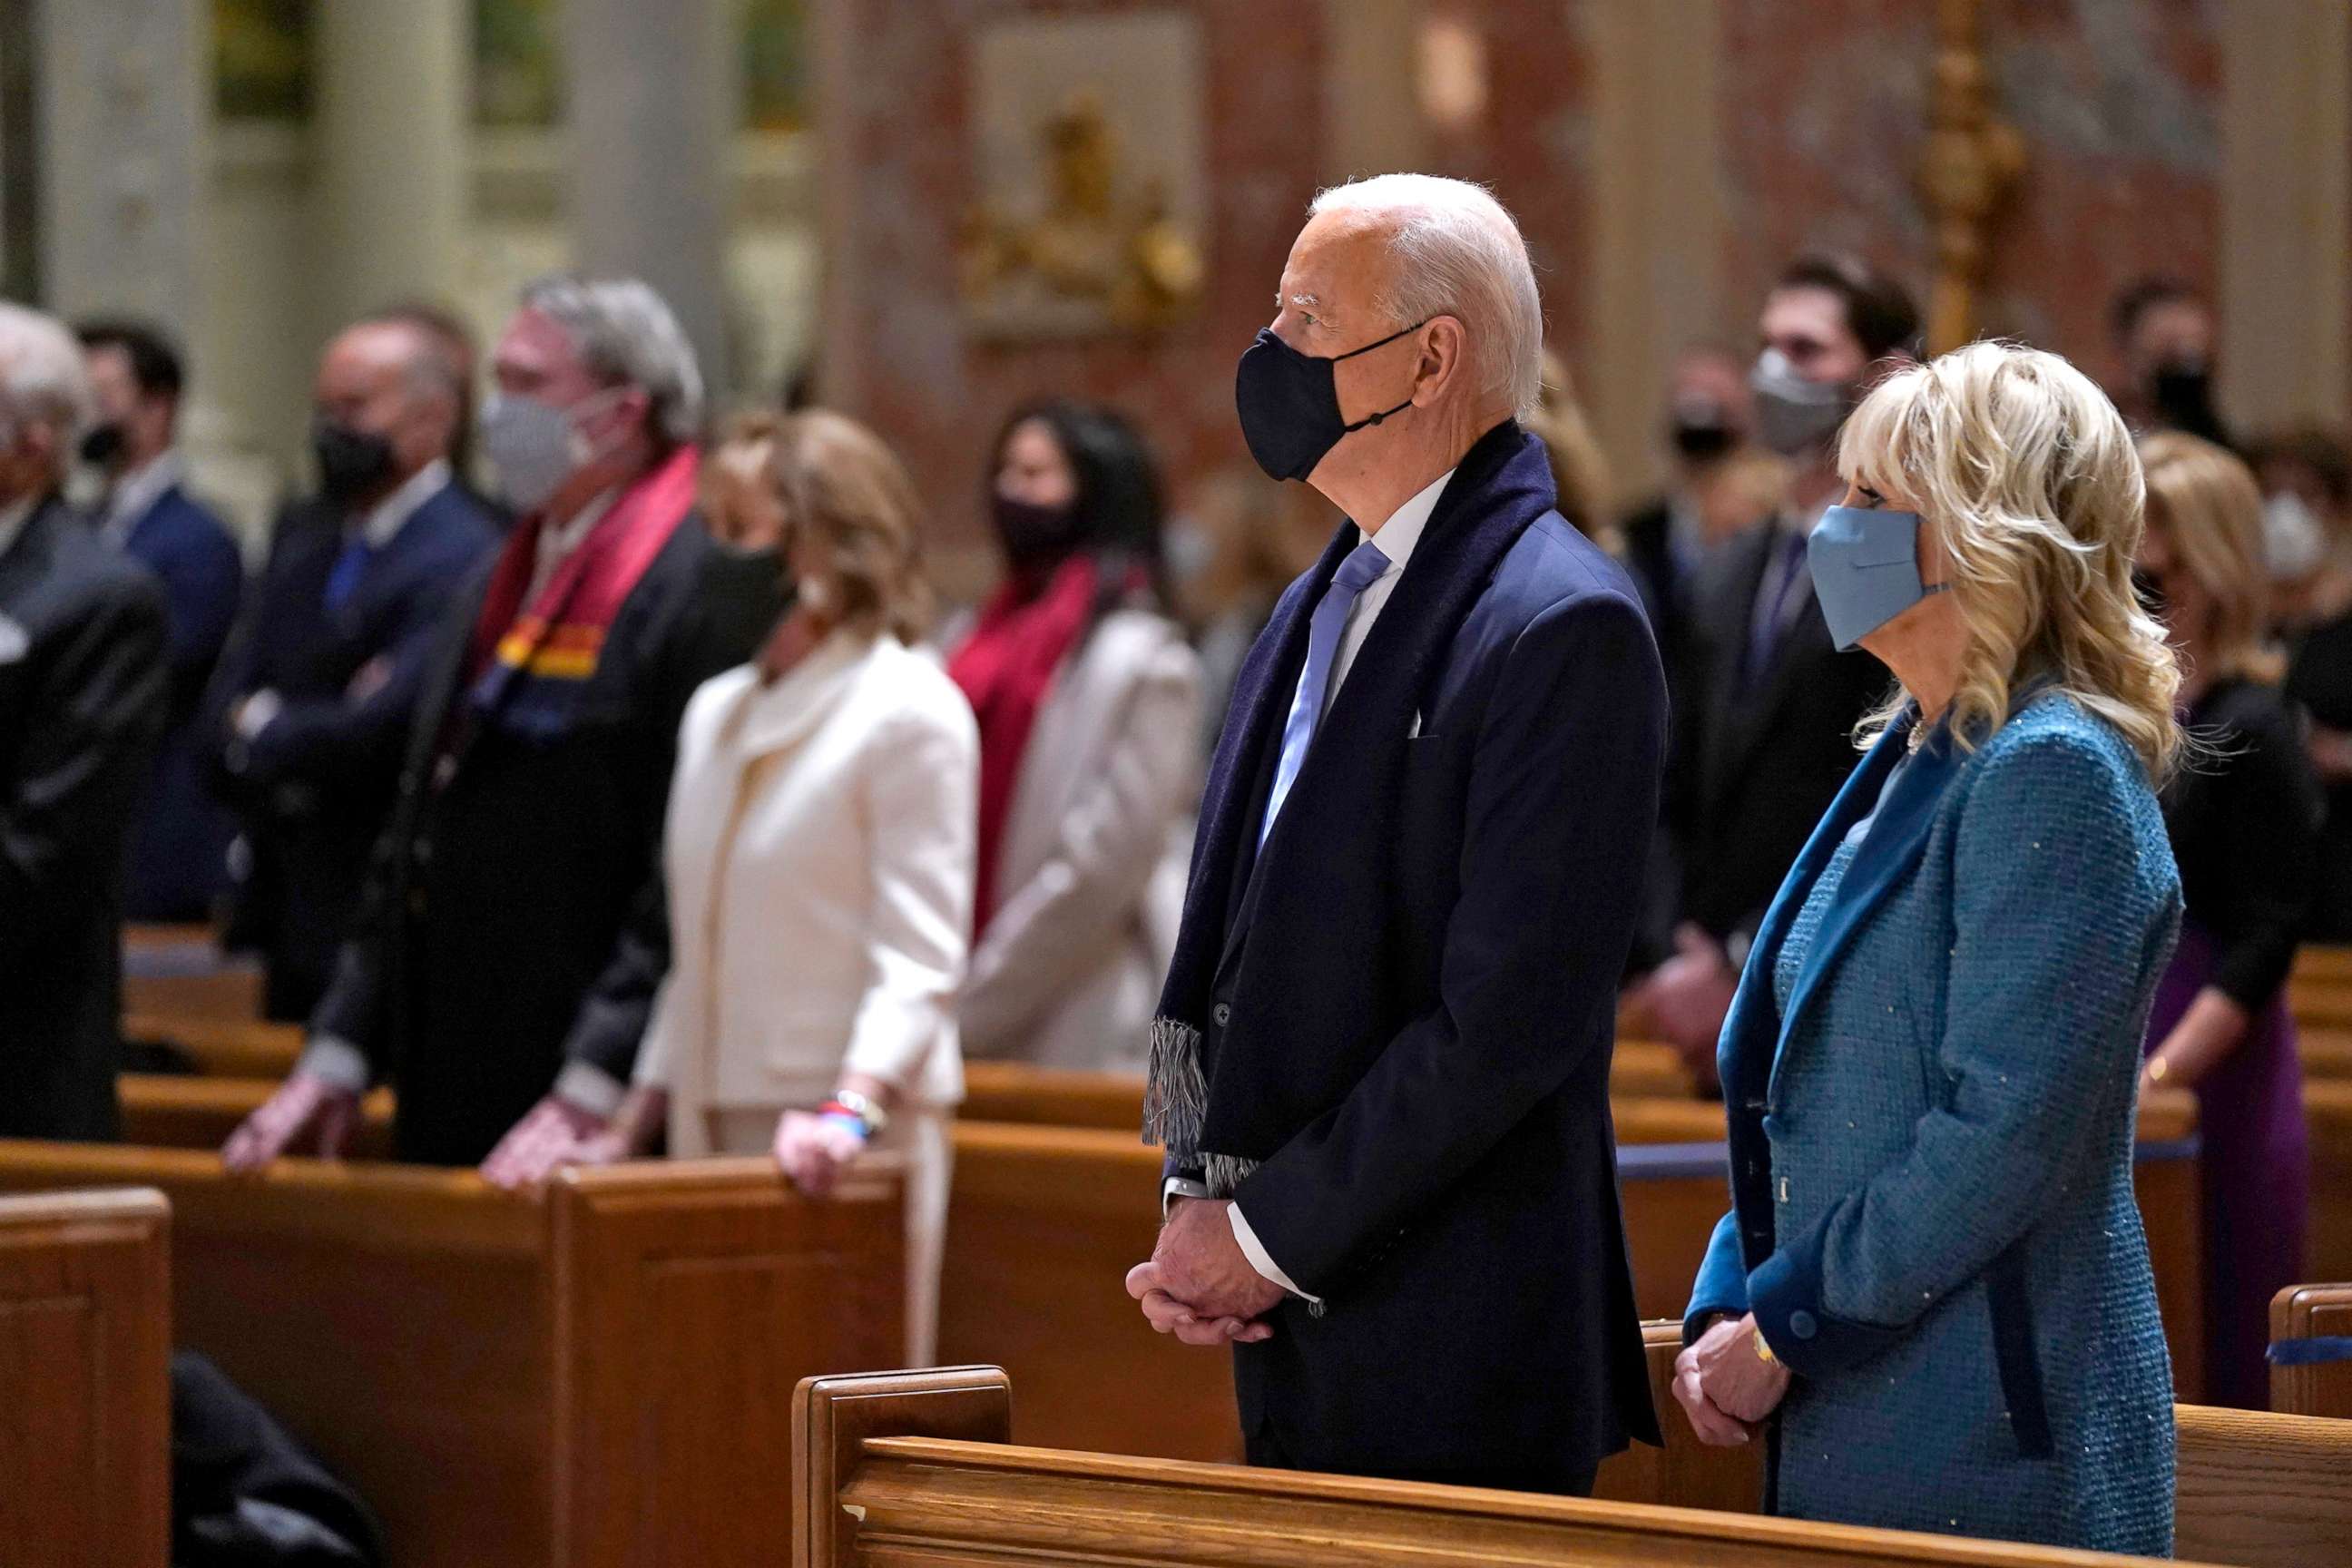 PHOTO: President-elect Joe Biden is joined by his wife Jill Biden as they celebrate Mass at the Cathedral of St. Matthew the Apostle during Inauguration Day ceremonies, Jan. 20, 2021, in Washington.